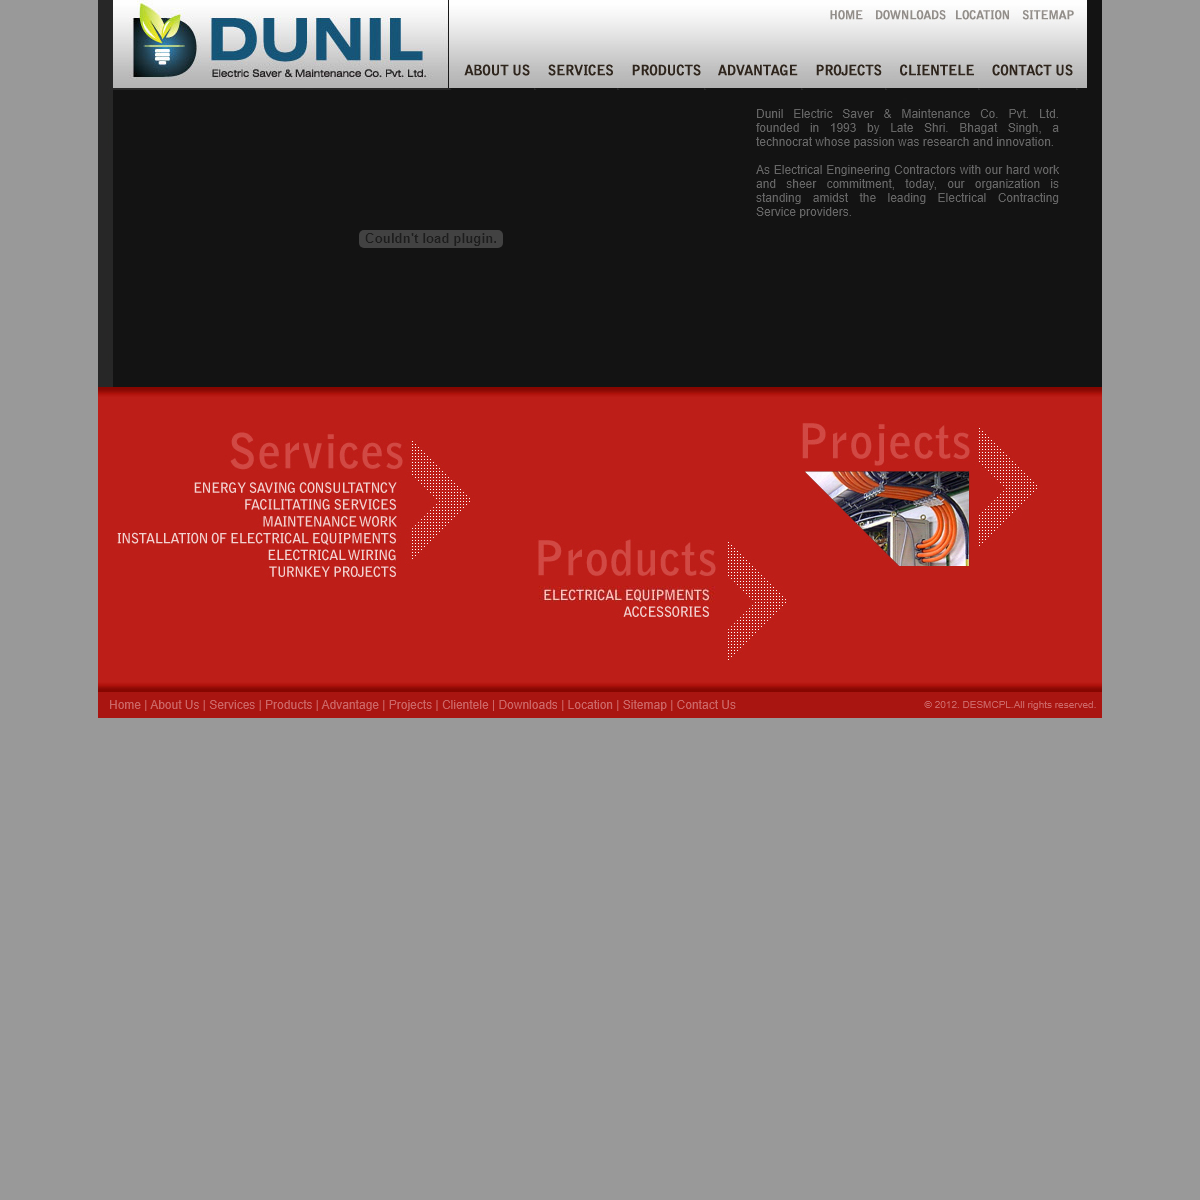 A complete backup of dunilelectric.com